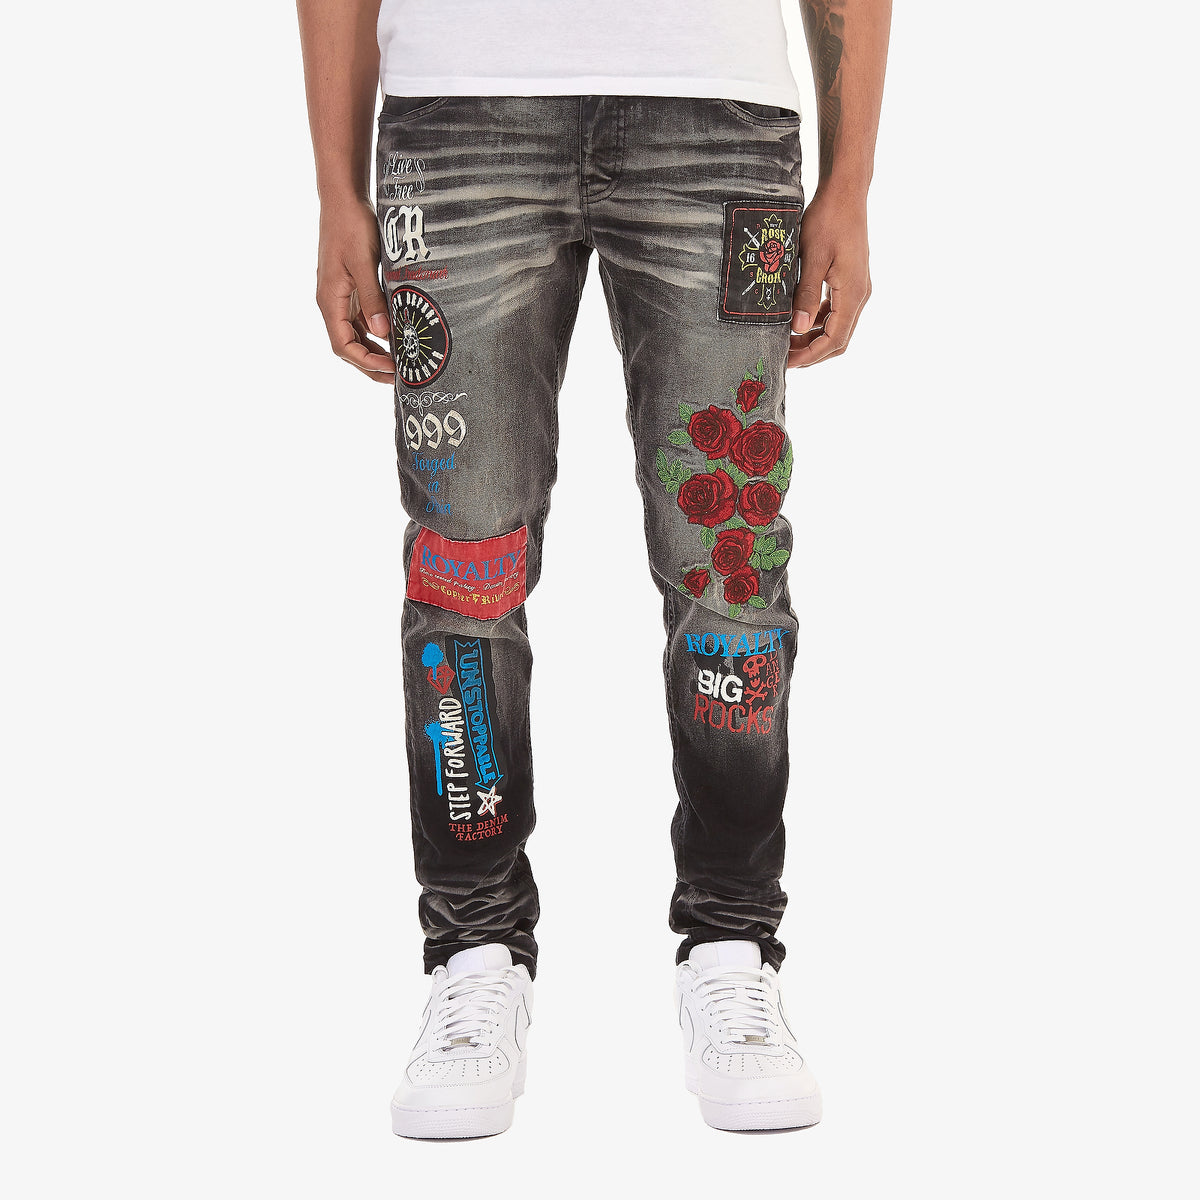 BLACK JEANS W/ PRINT & ROSE EMBROIDERY